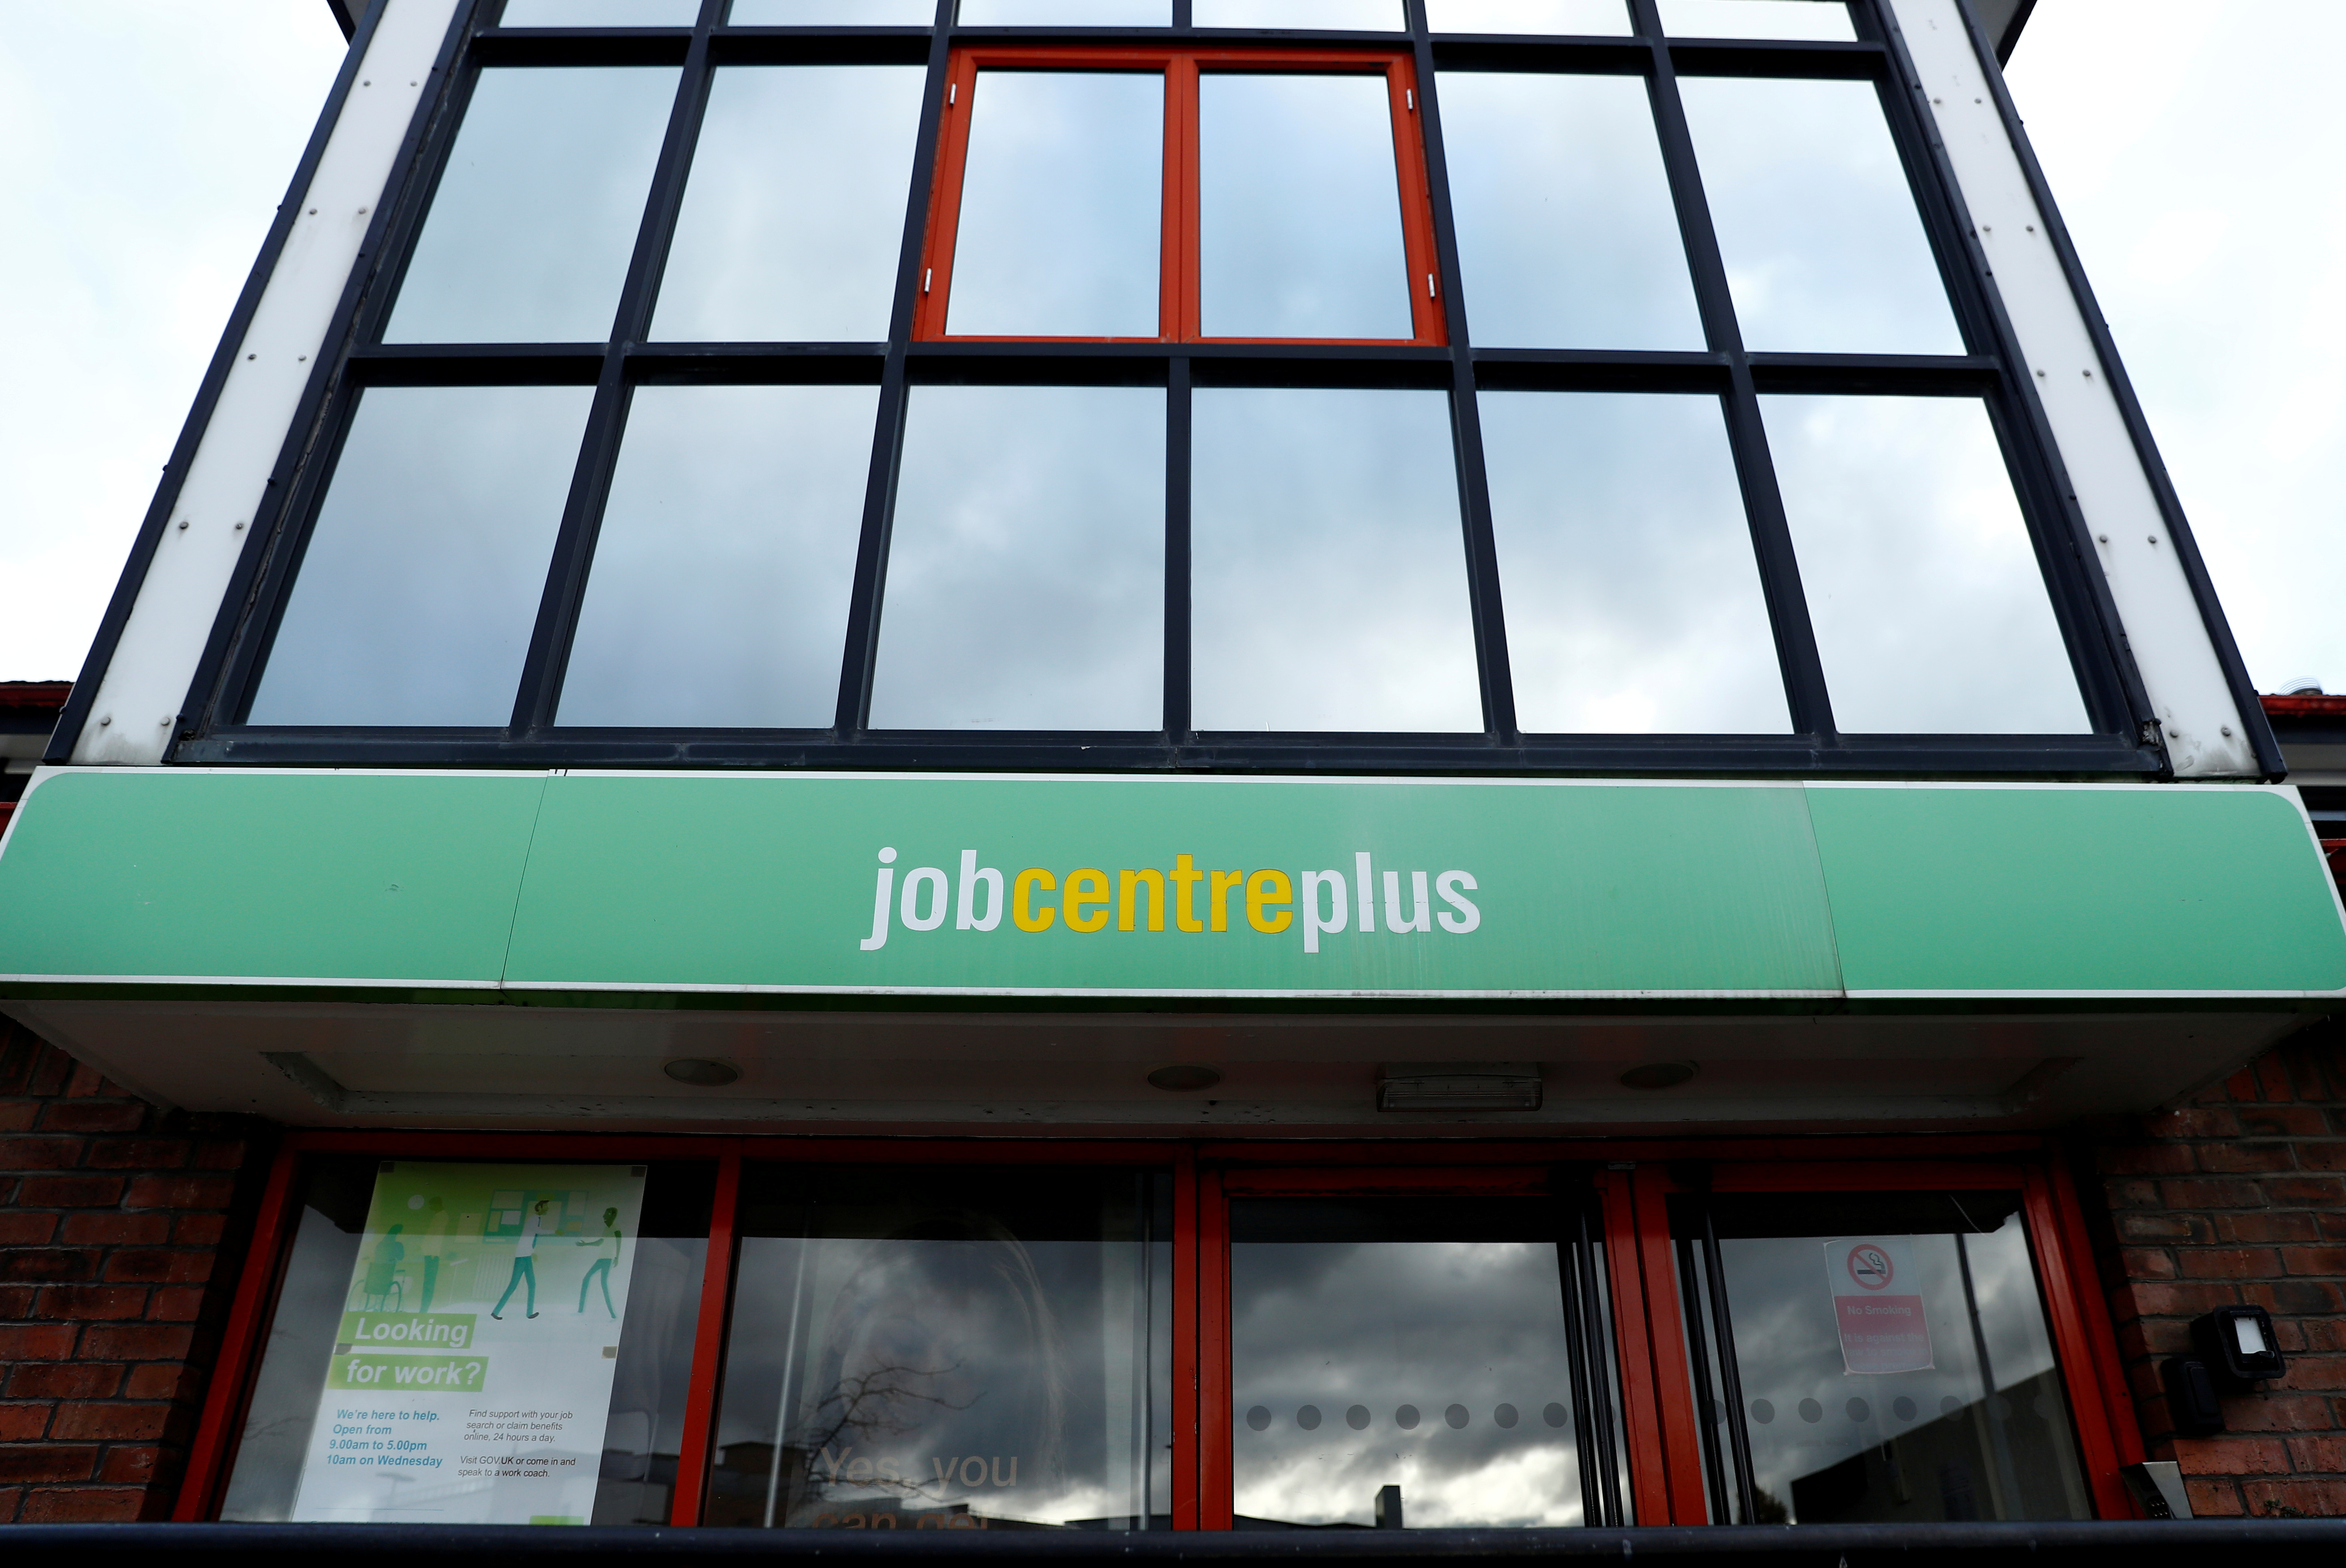 General view of a Jobcentre Plus building in Northwich, Britain, November 10, 2020. REUTERS/Jason Cairnduff/File Photo